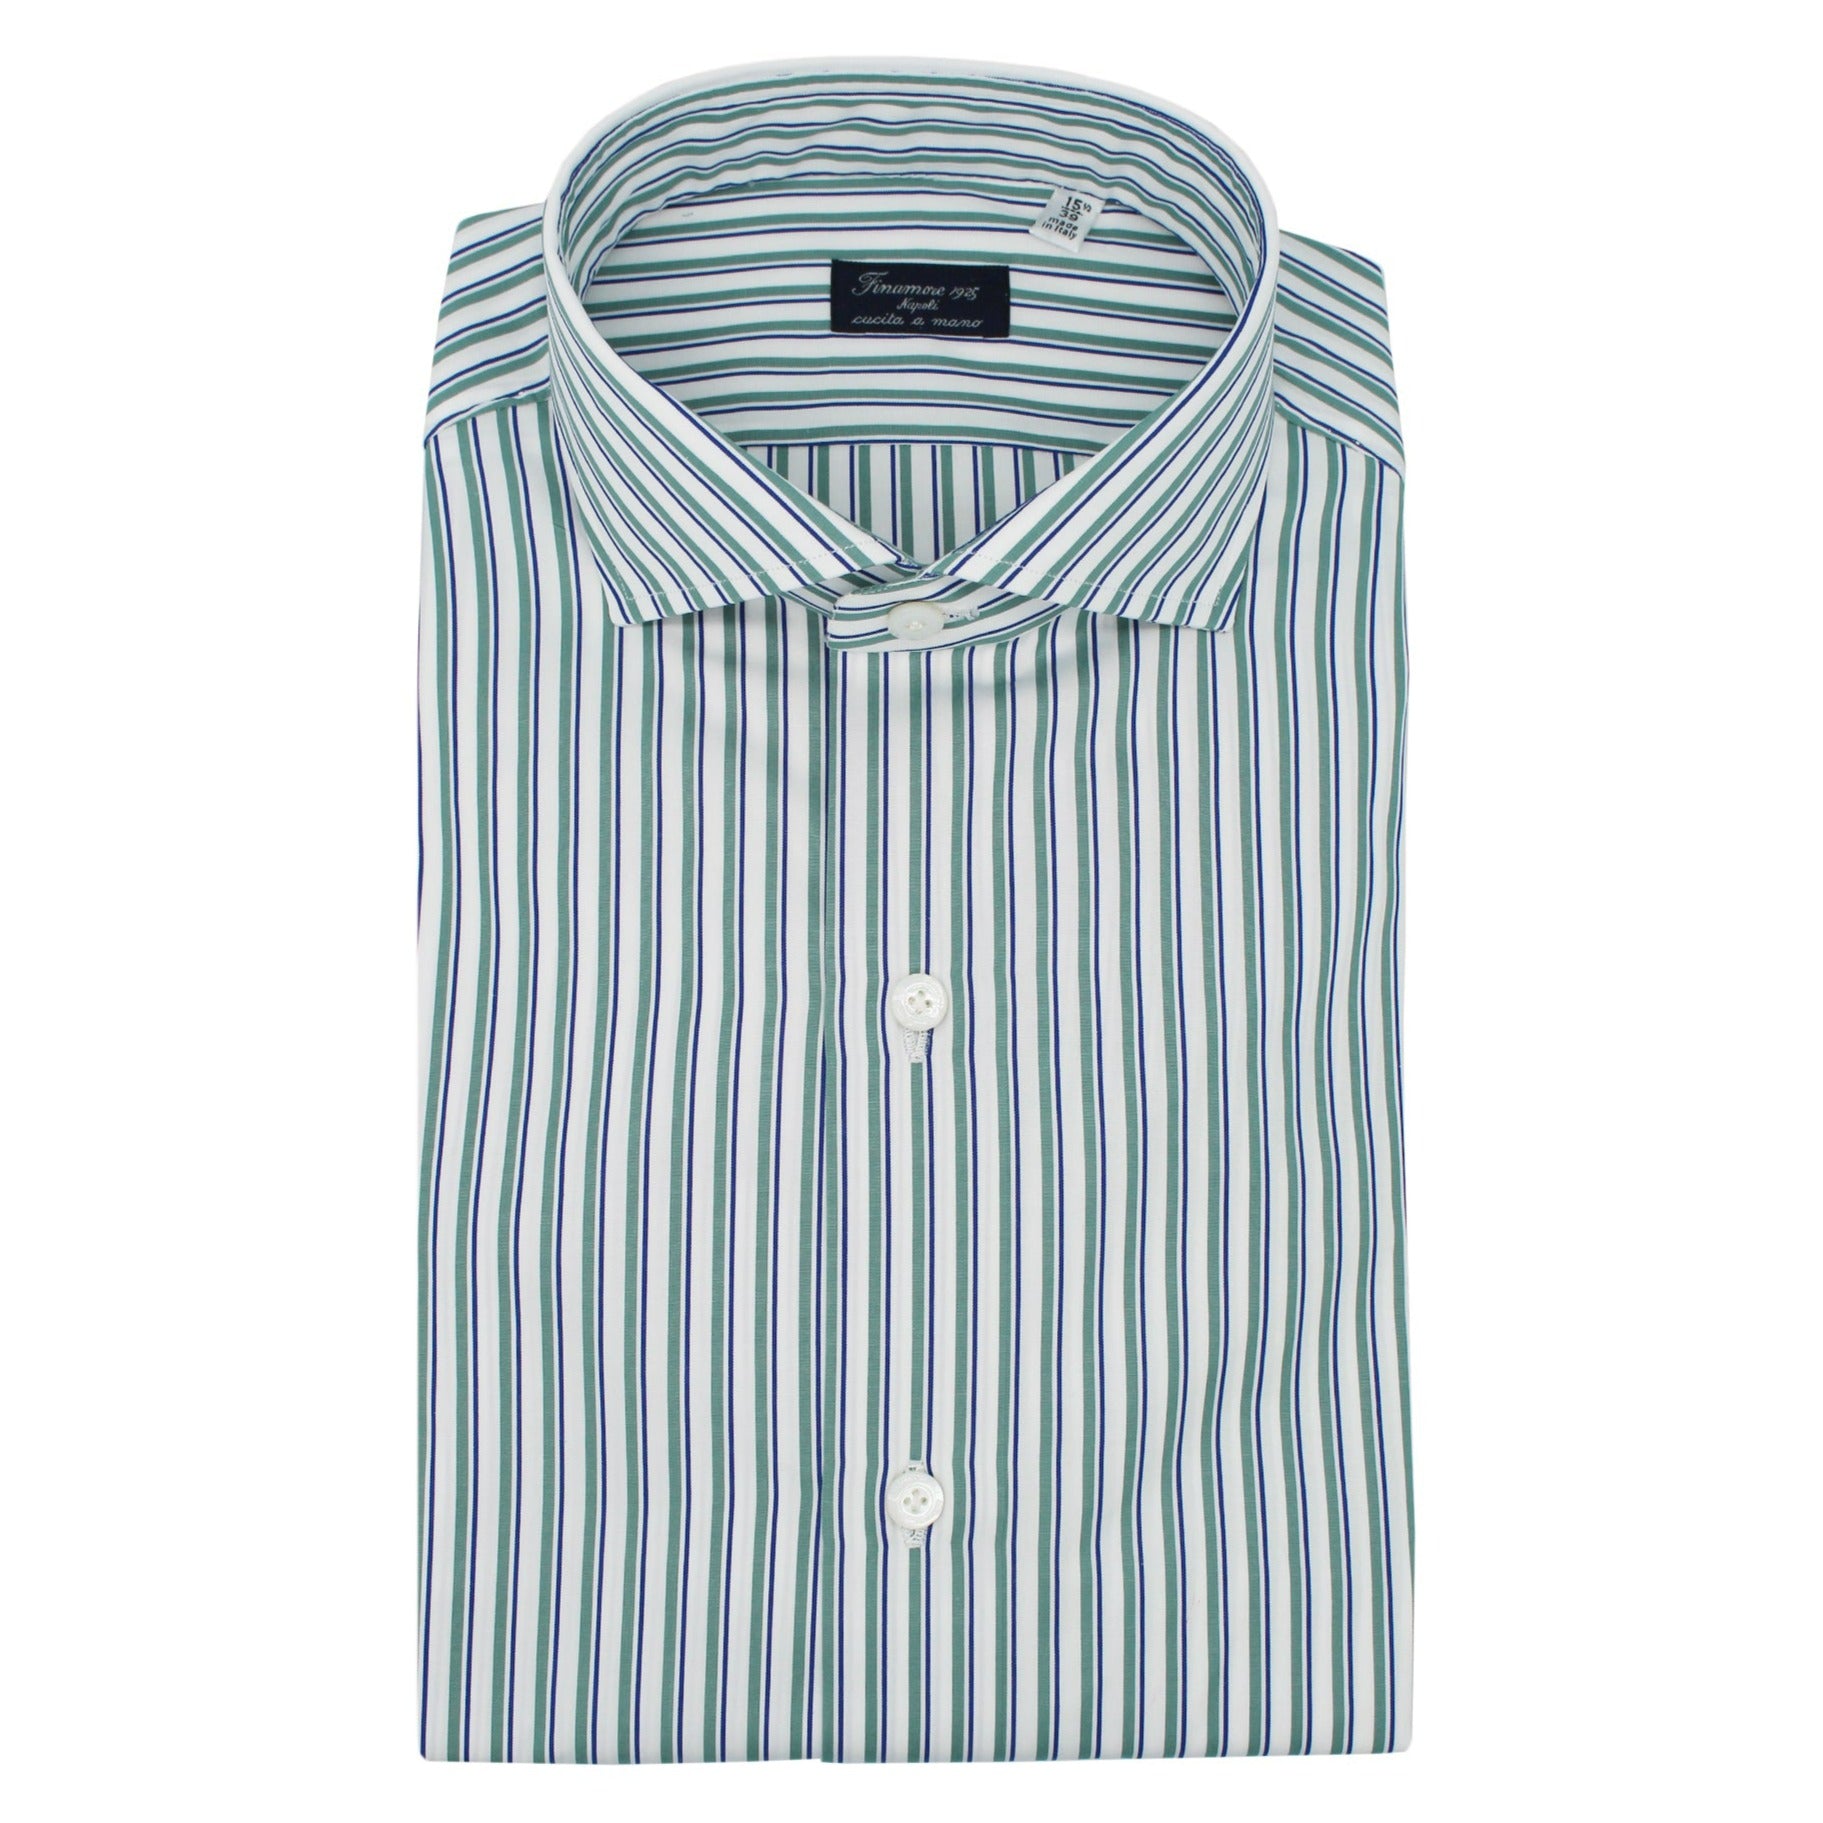 Napoli regular fit striped shirt with darts in back